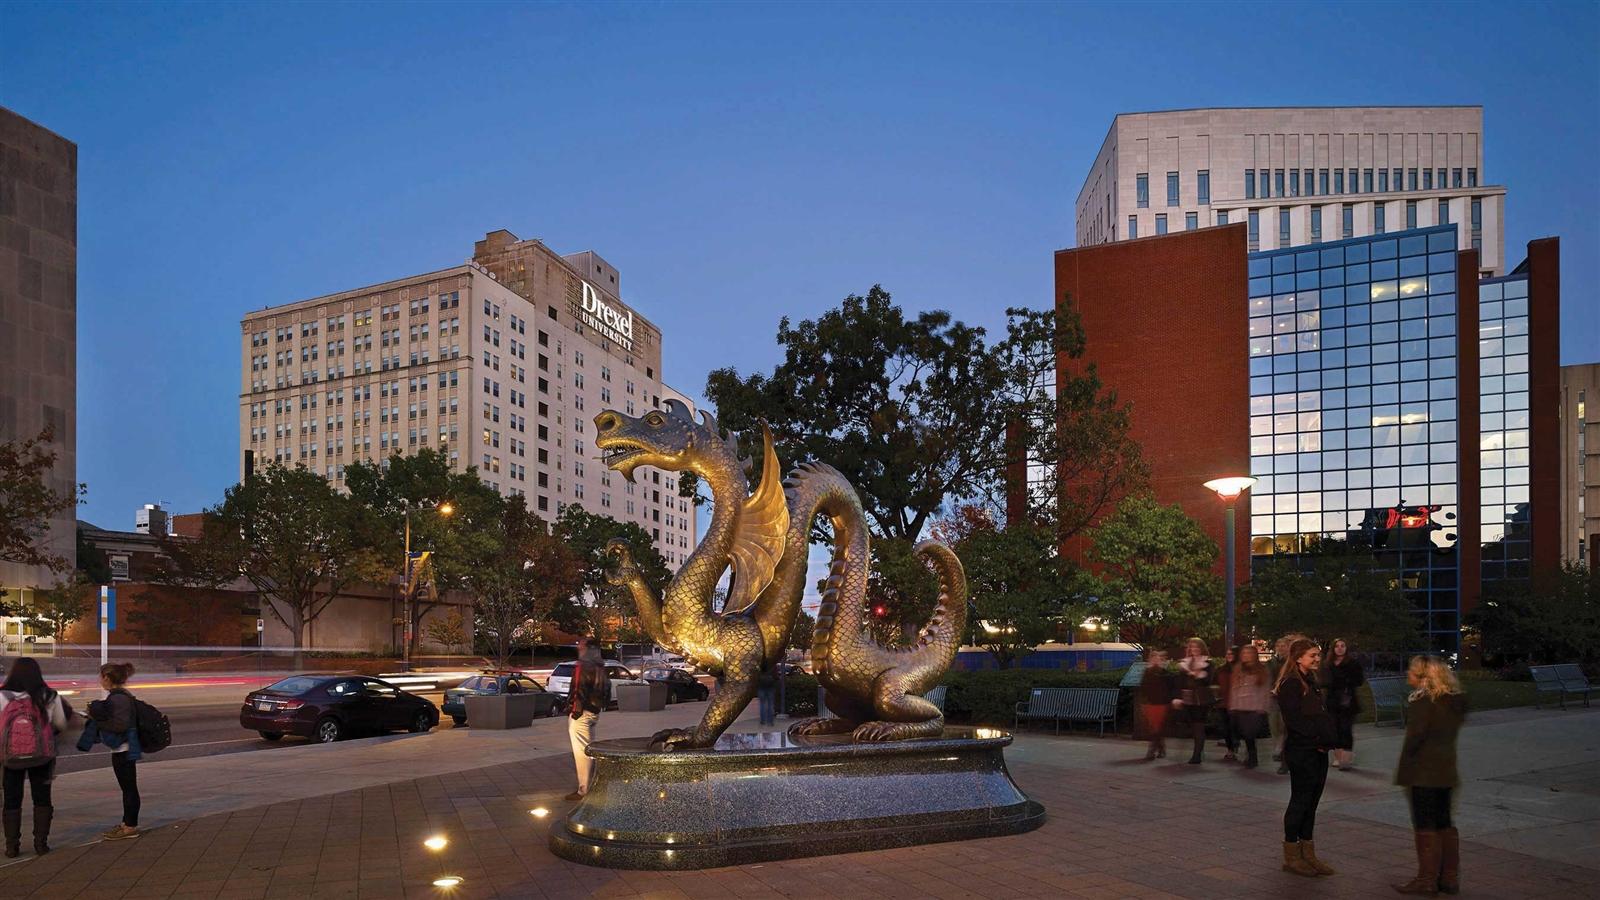 Drexel Statue during the evening